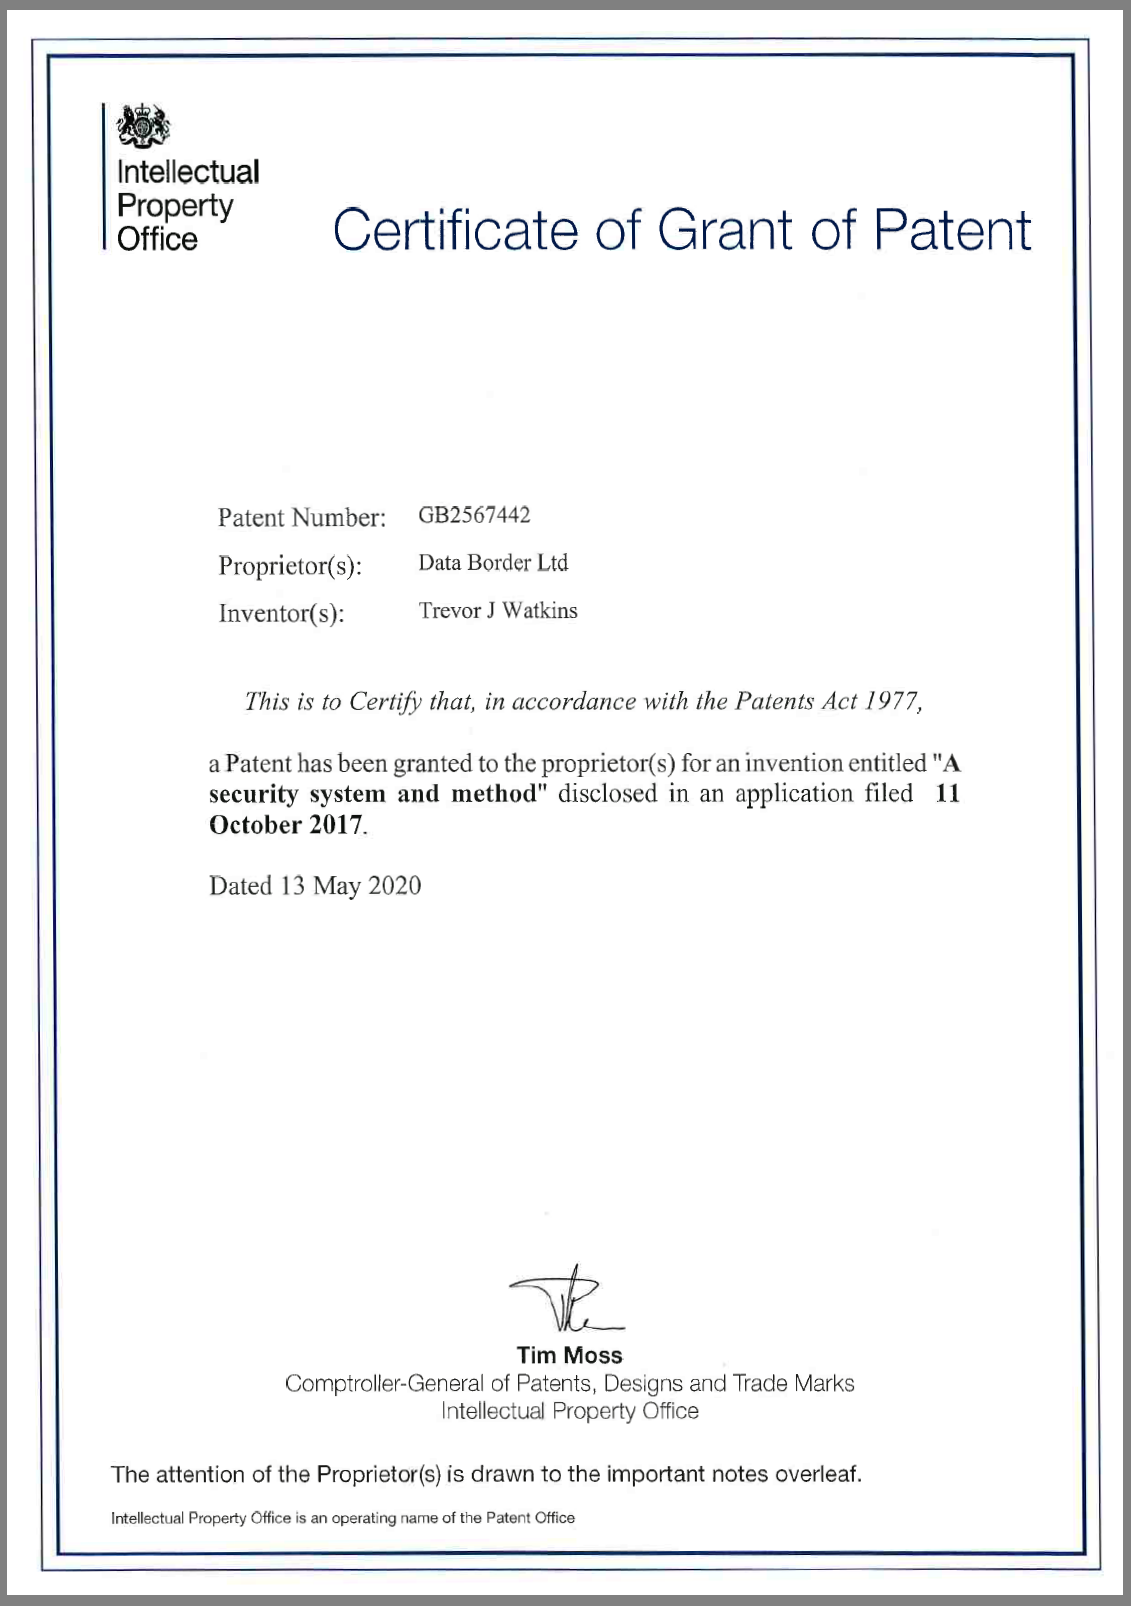 Patent published by UKIPO